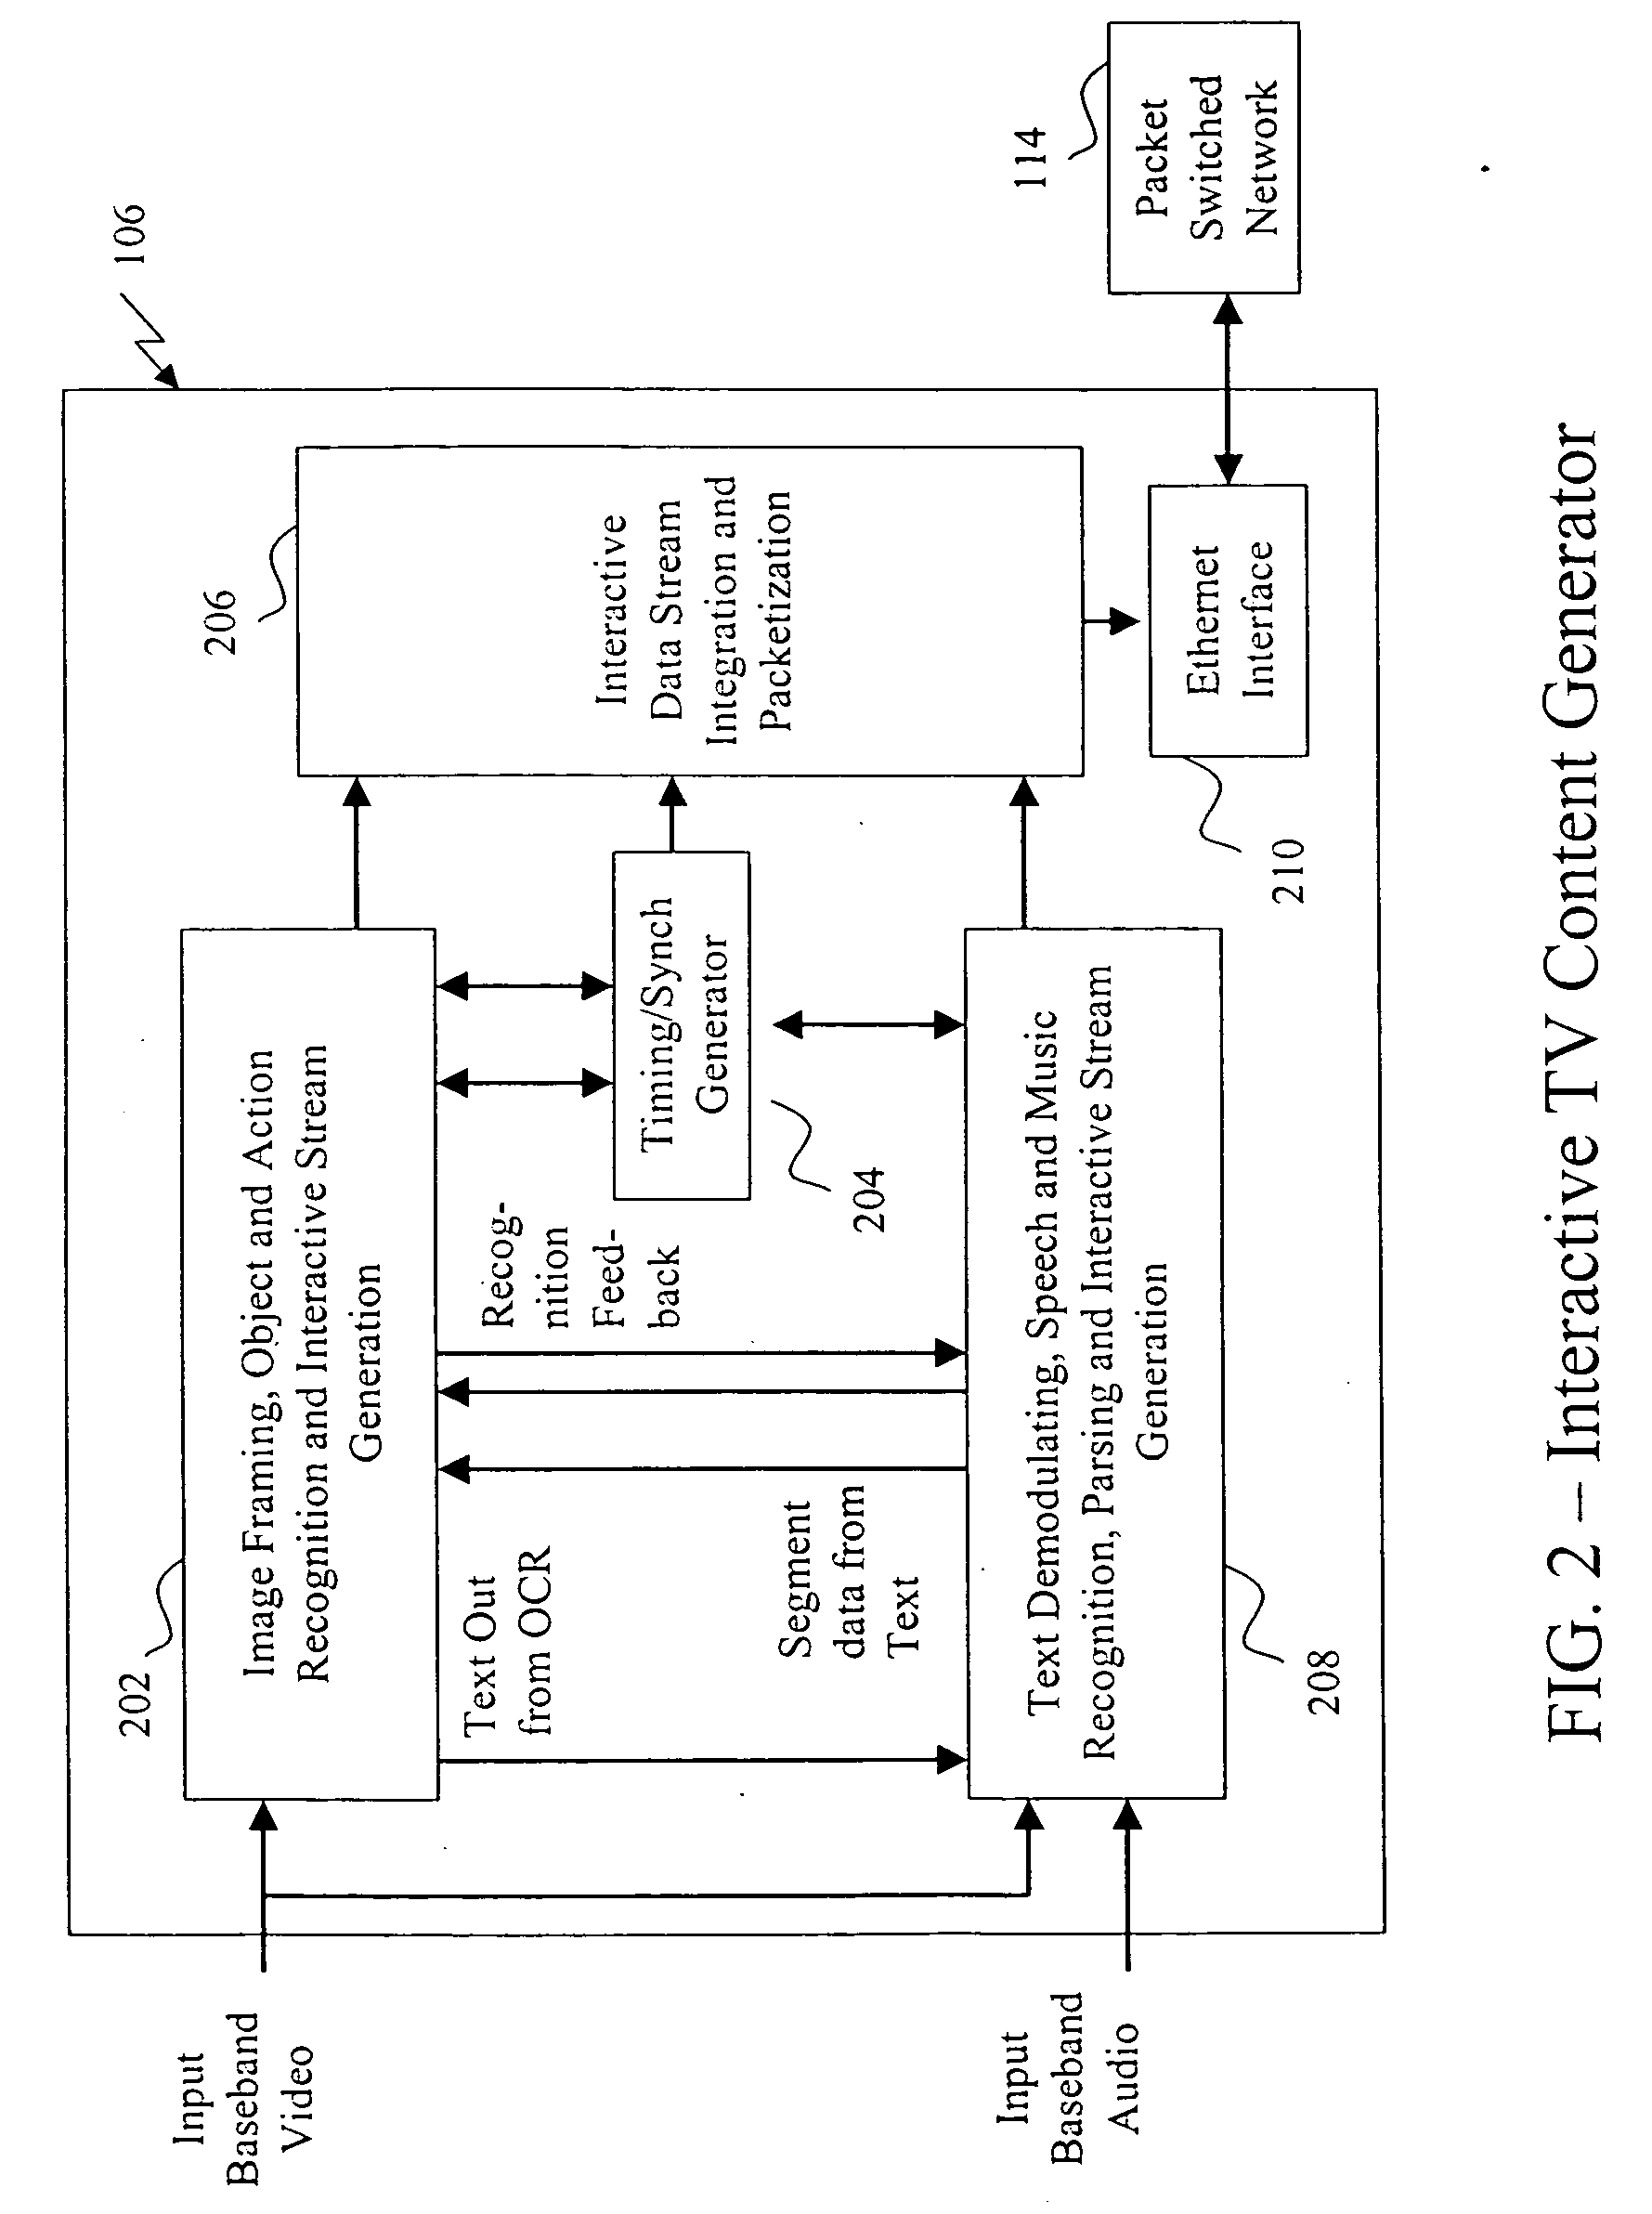 System and method for generation of interactive TV content